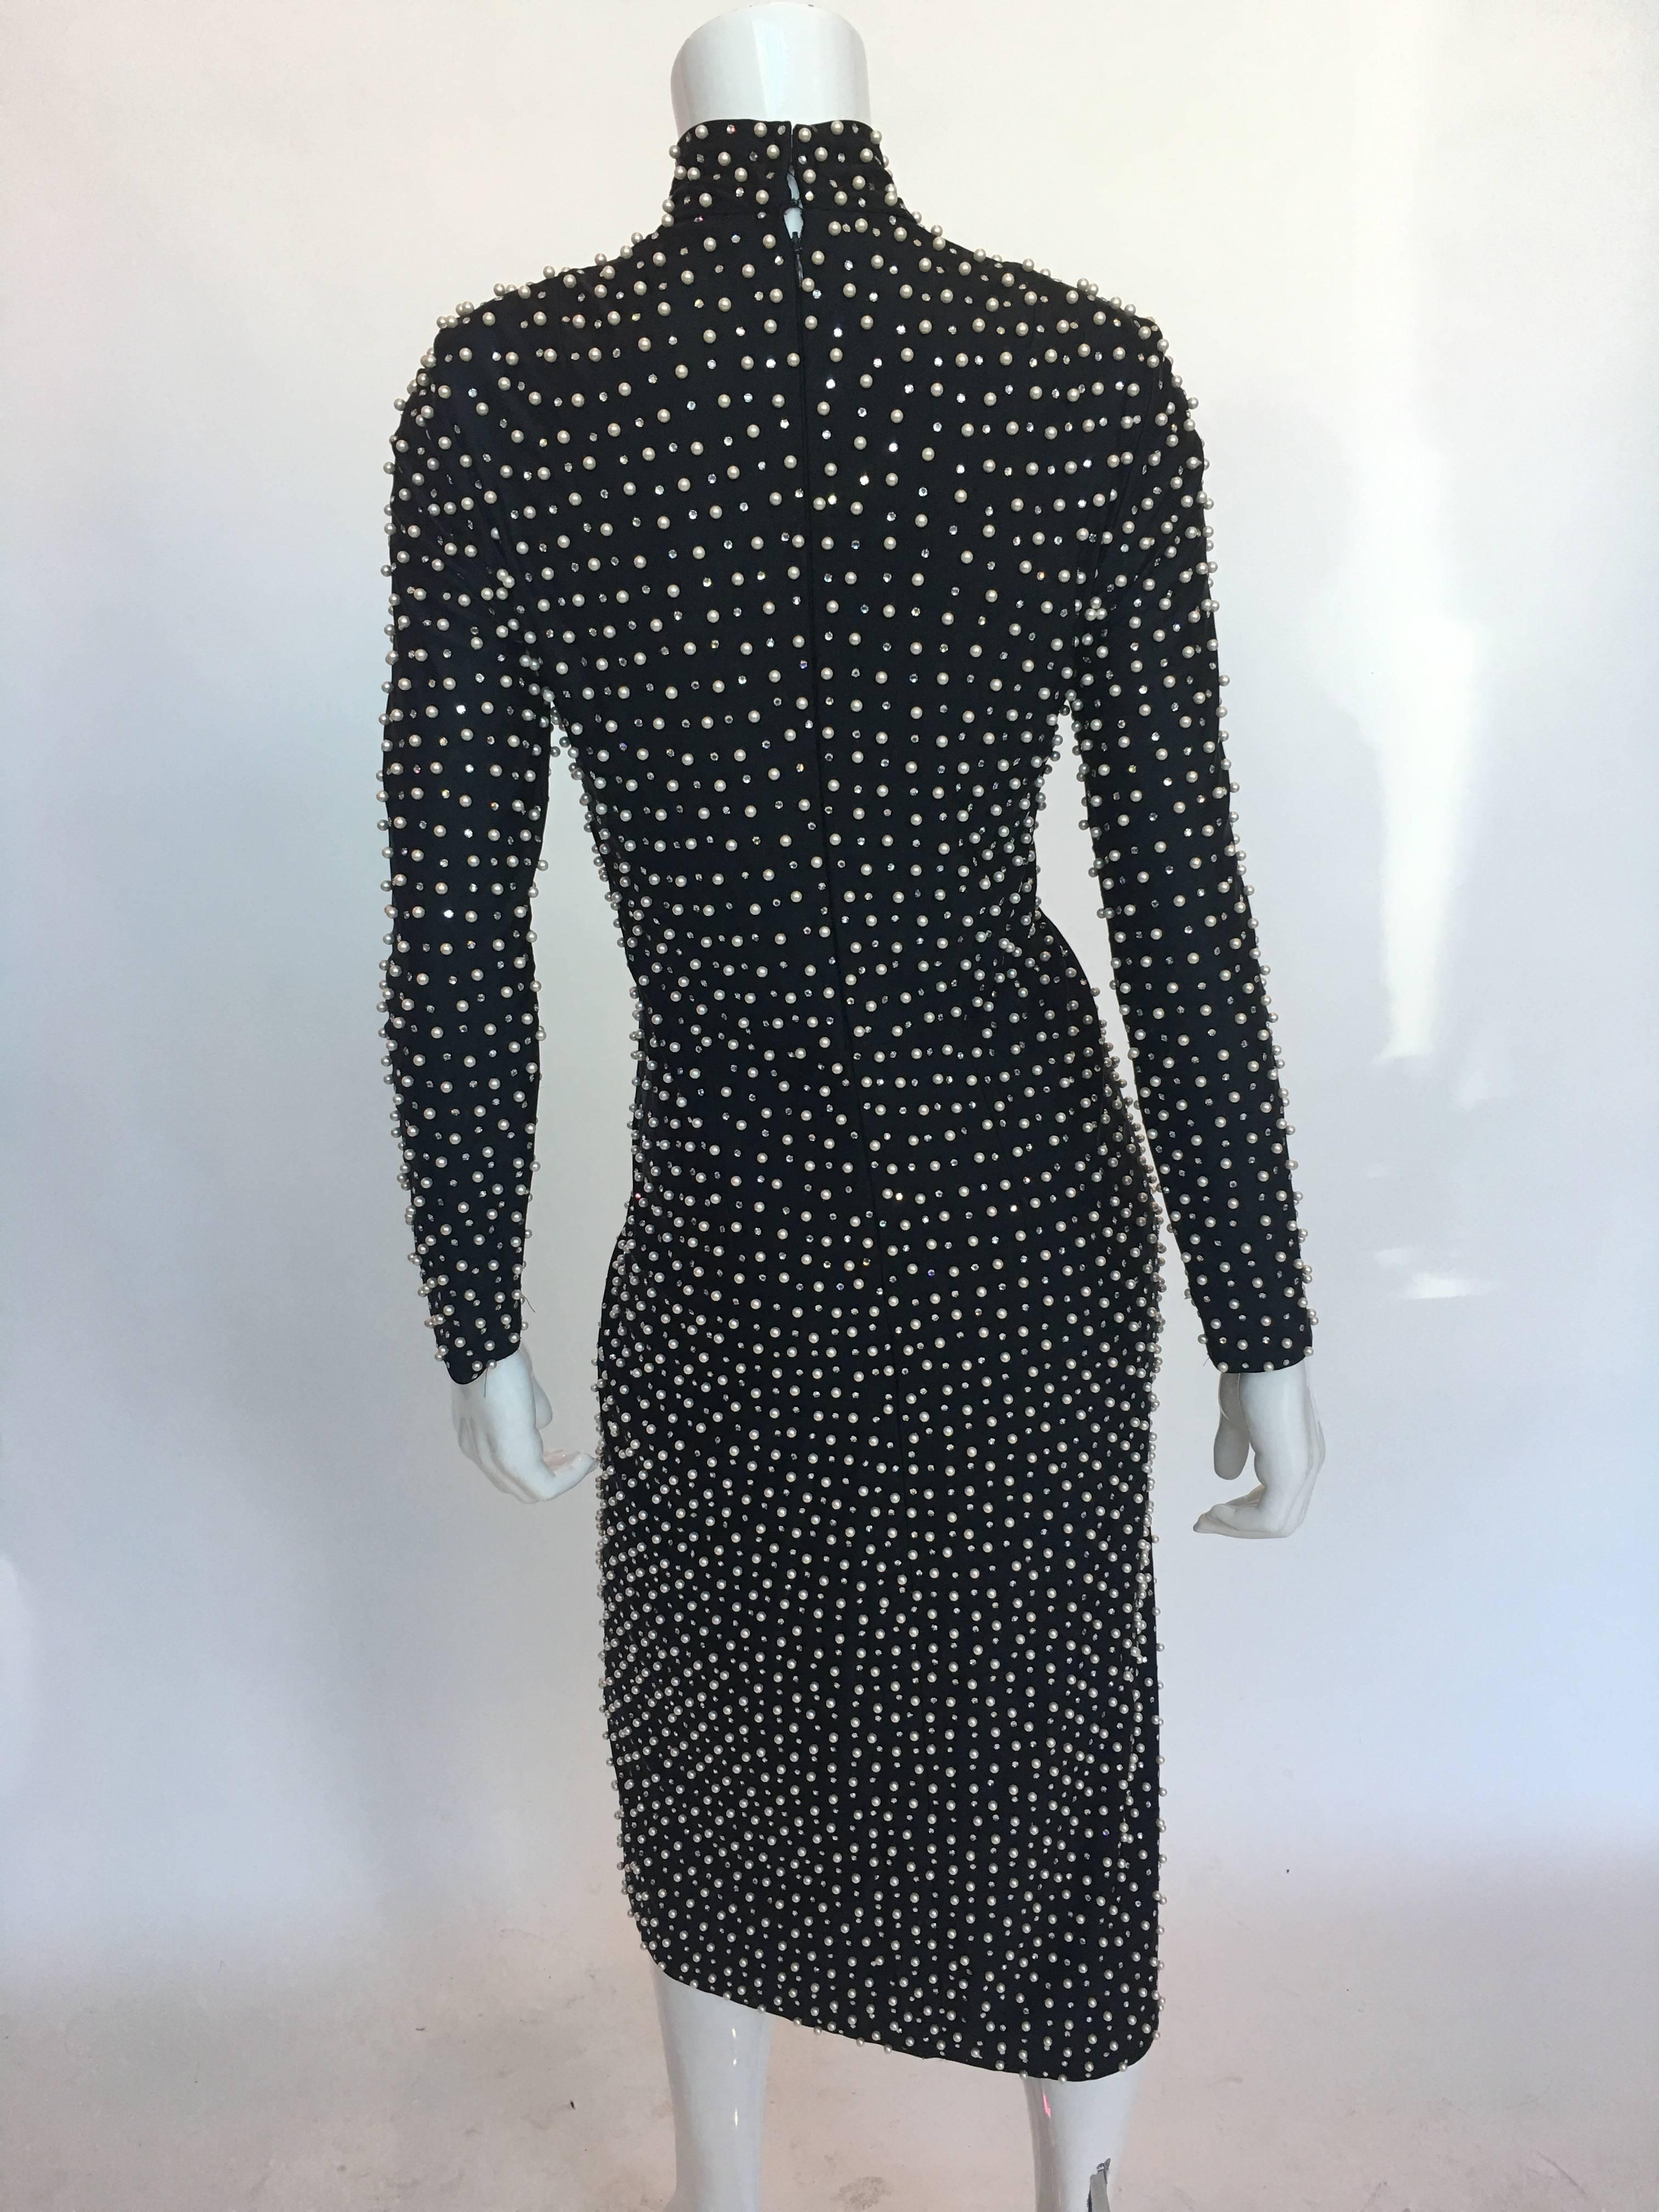 Lillie Rubin pearl and rhinestone encrusted black dress 

Measurements (laid flat):
Shoulder to shoulder seam - 14 1/2 in.
Shoulder seam to wrist cuff - 22 1/2 in.
Armpit to armpit - 15 in.
Waist - 13 1/2 in.
Bust - 15 in.
Hips - 17 in.
Length; neck